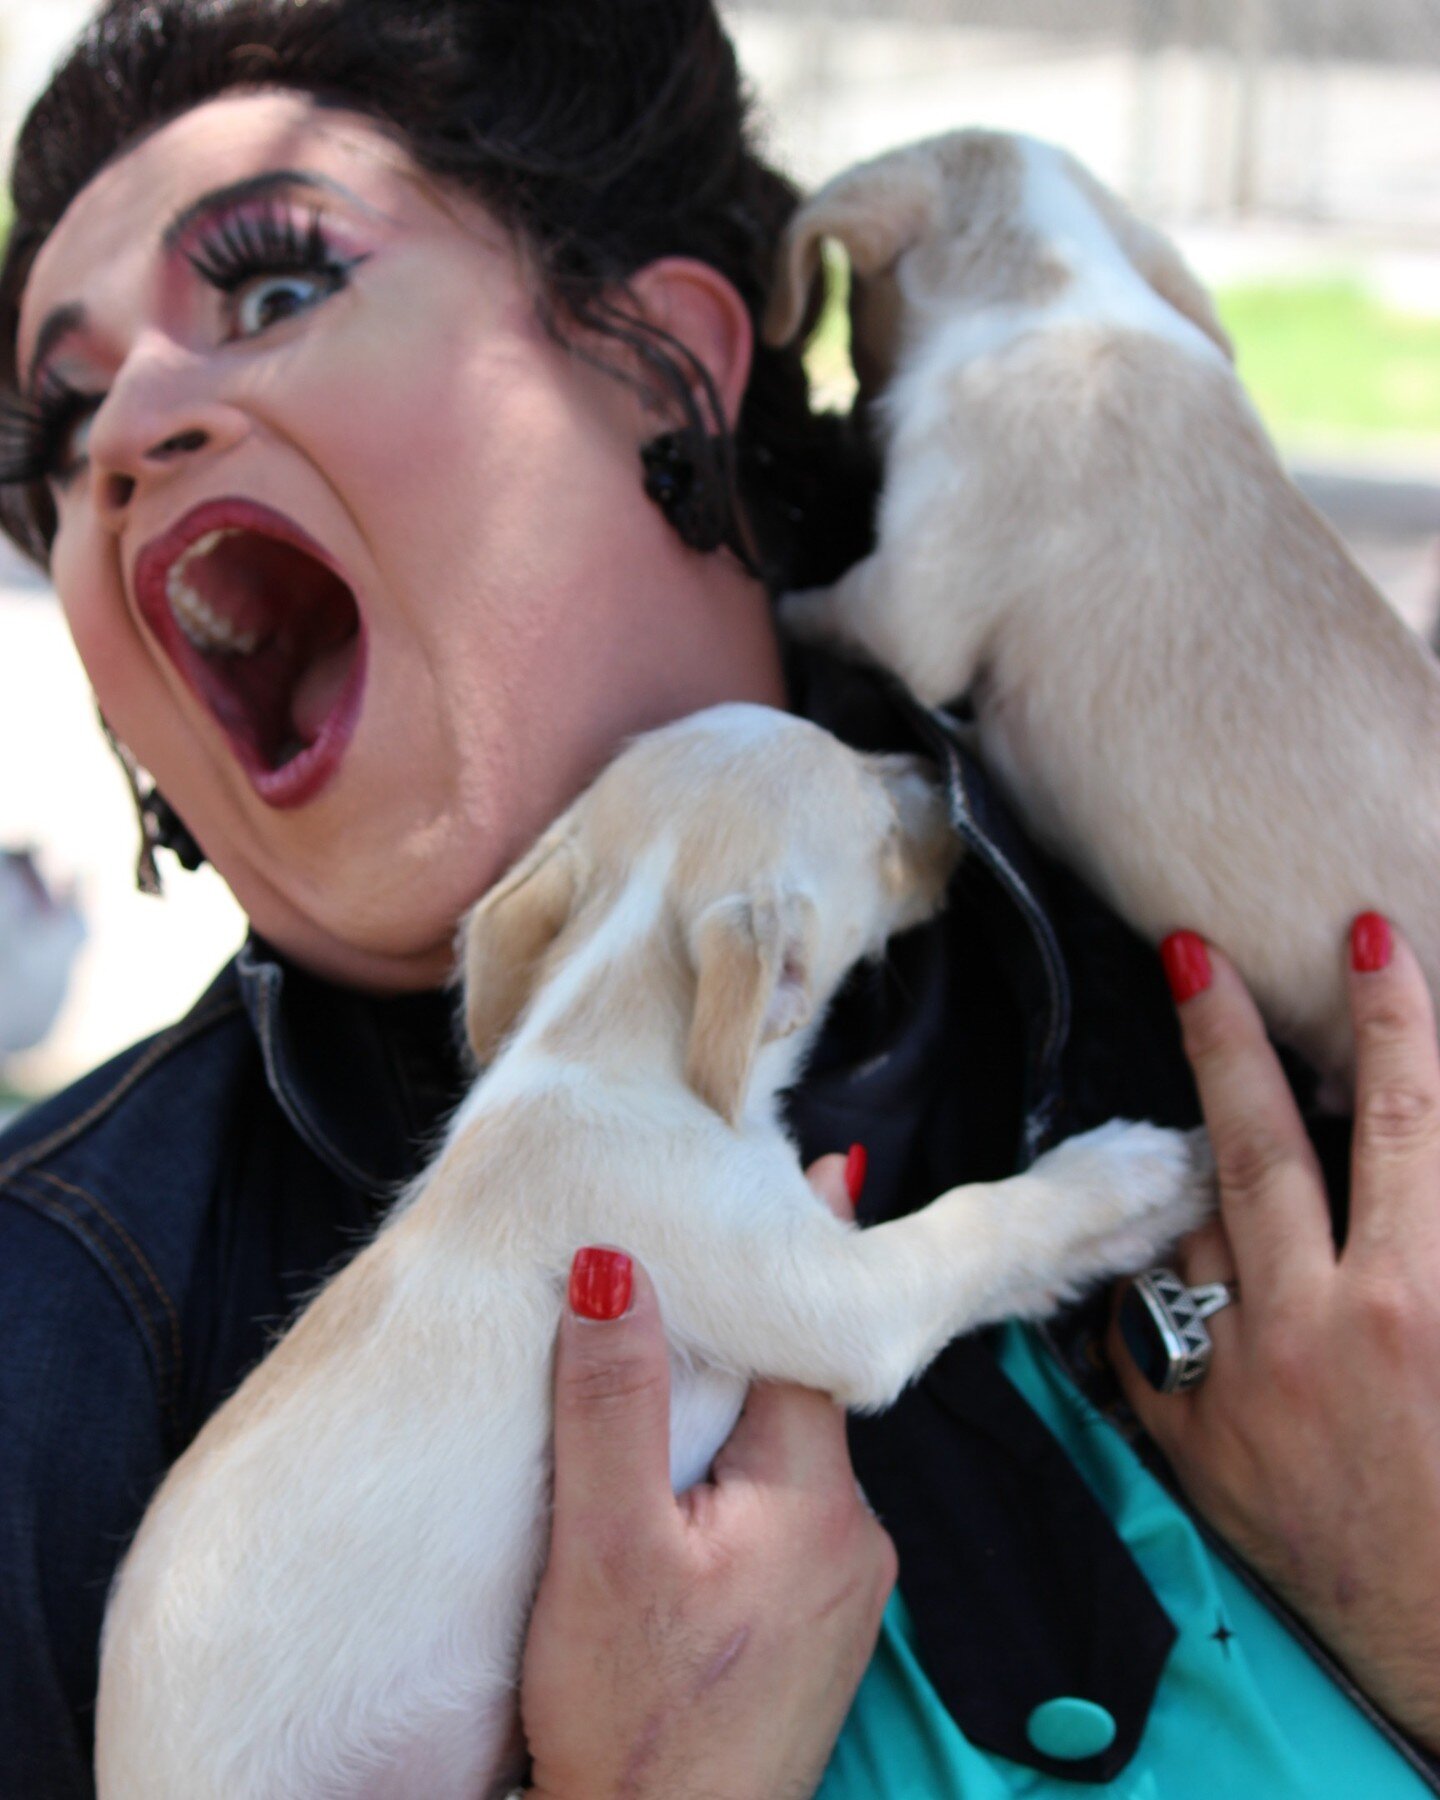 #TBT It's throwback Thursday and how about a pic showing that time our Markets' Manager David AKA Boom Boom was attacked by some adorable puppies at @arlelpaso while on a photoshoot for Barks, Brunch, &amp; Drag Bingo! How many remember this fun even